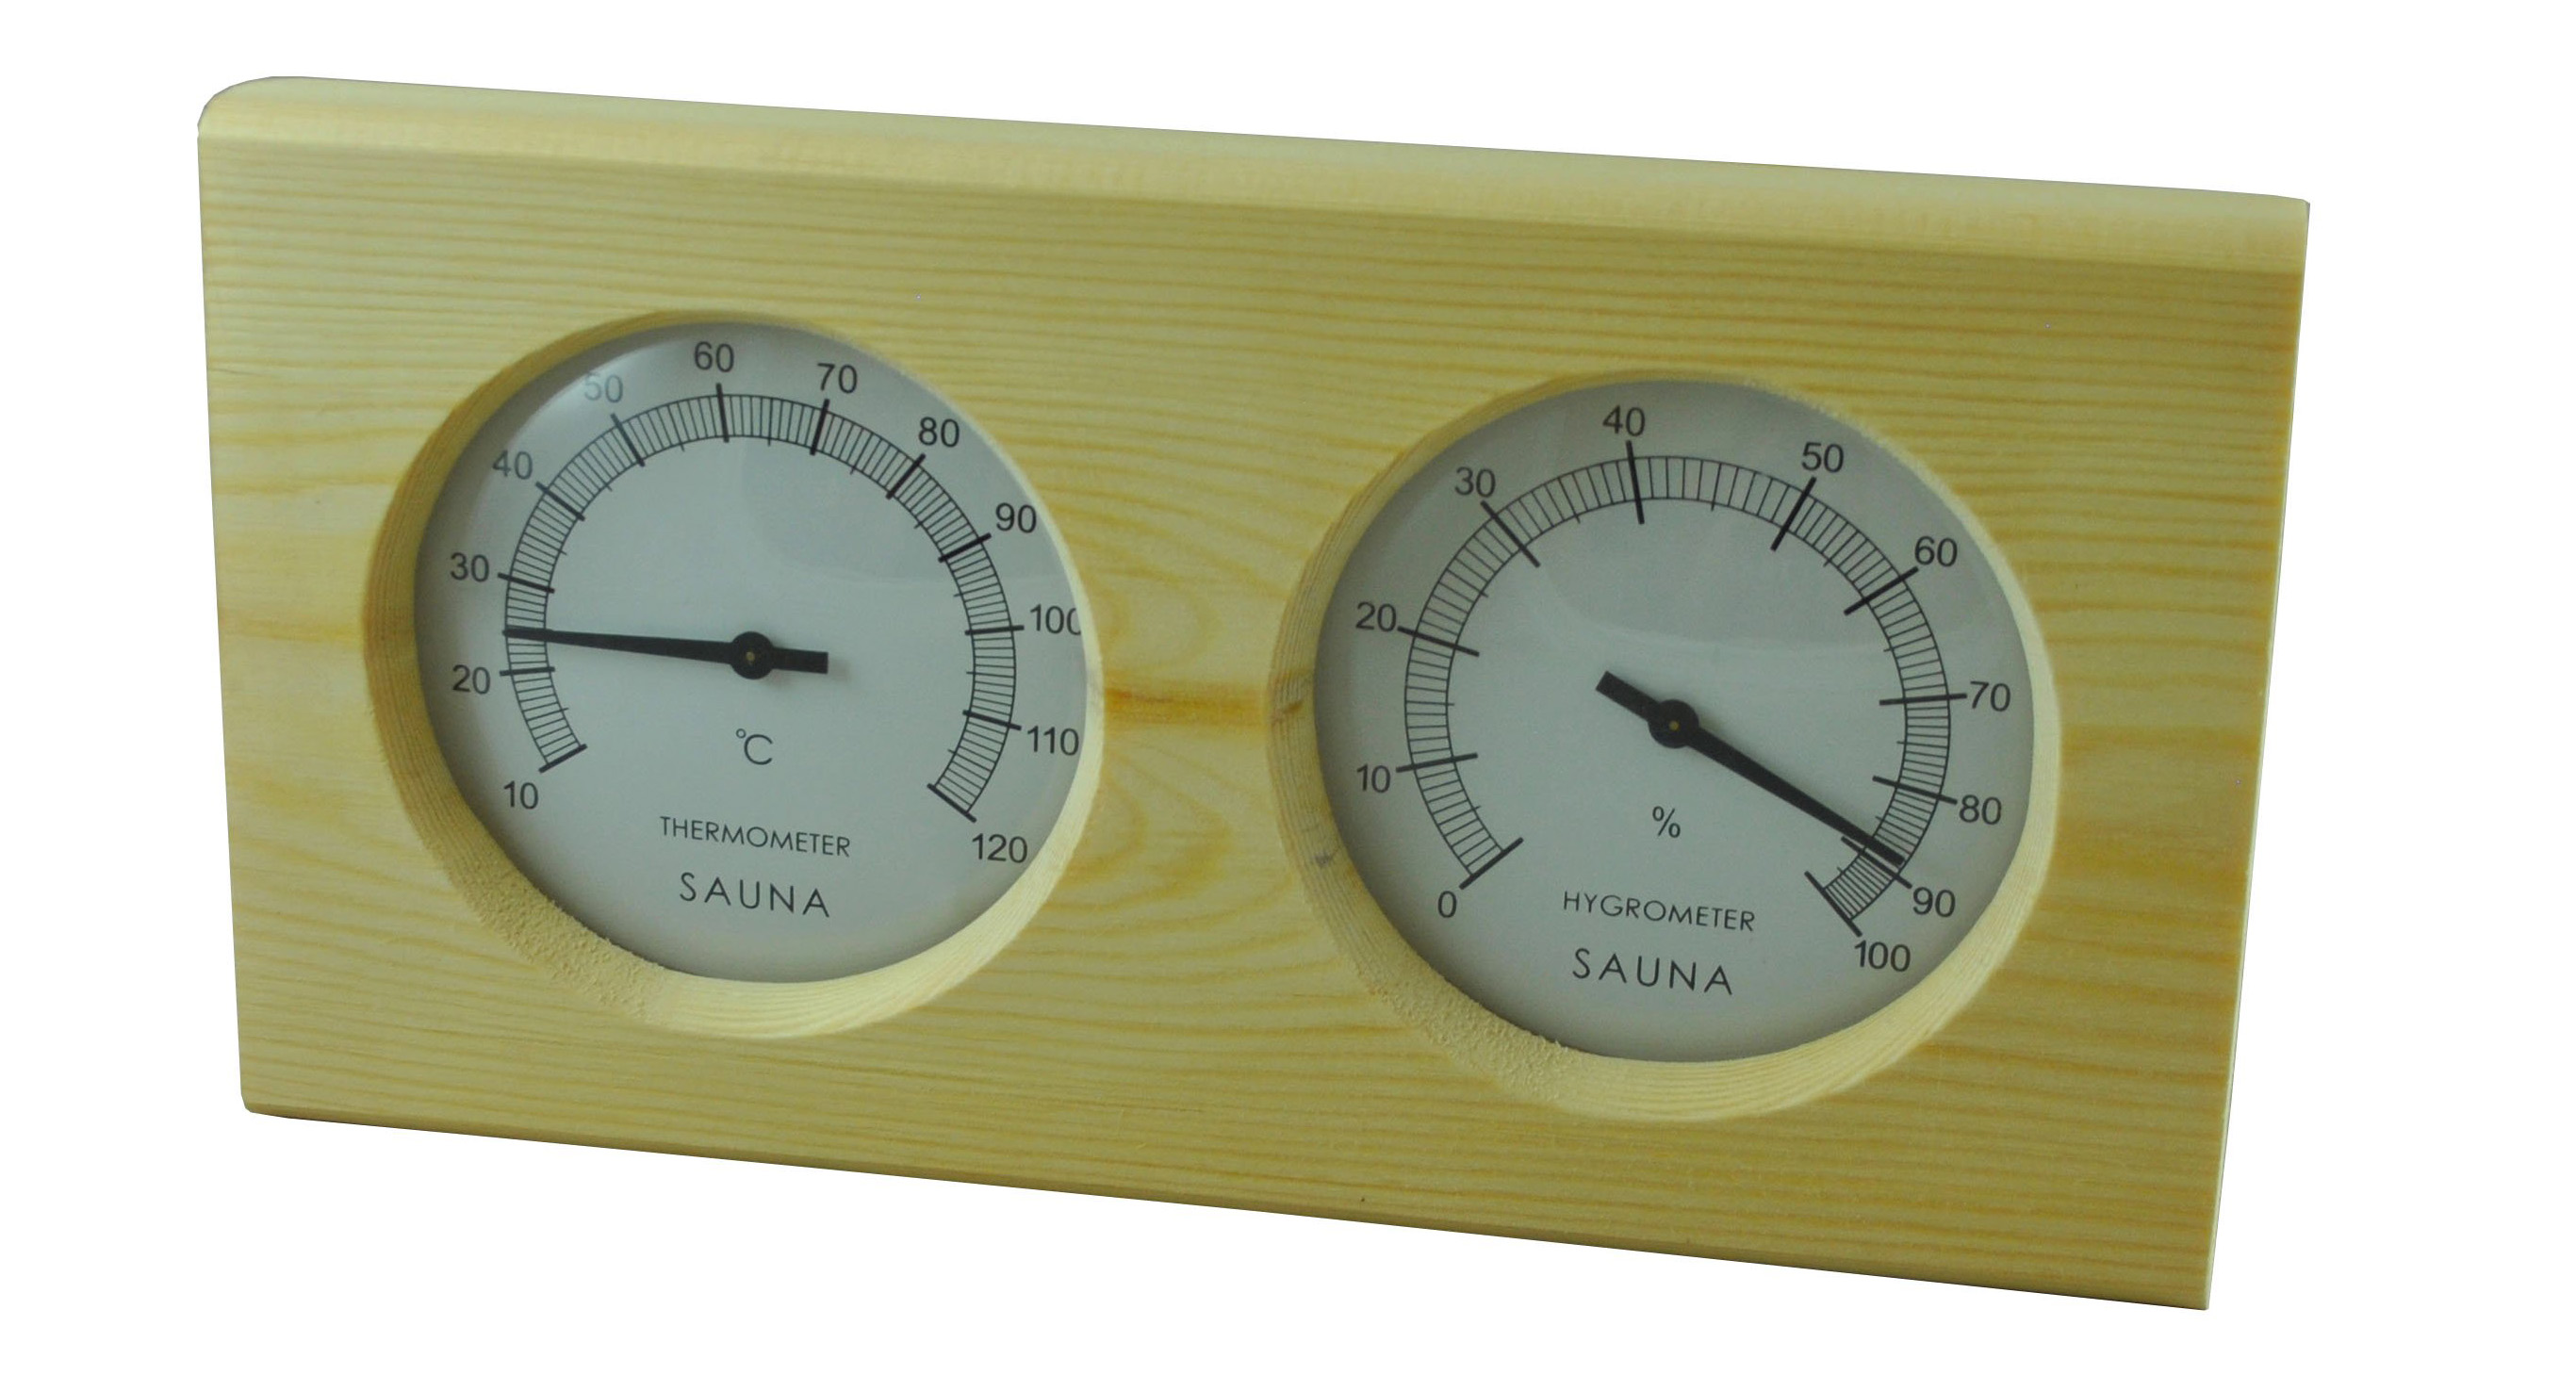 Pine Sauna Thermometer and Hygrometer in Celsius